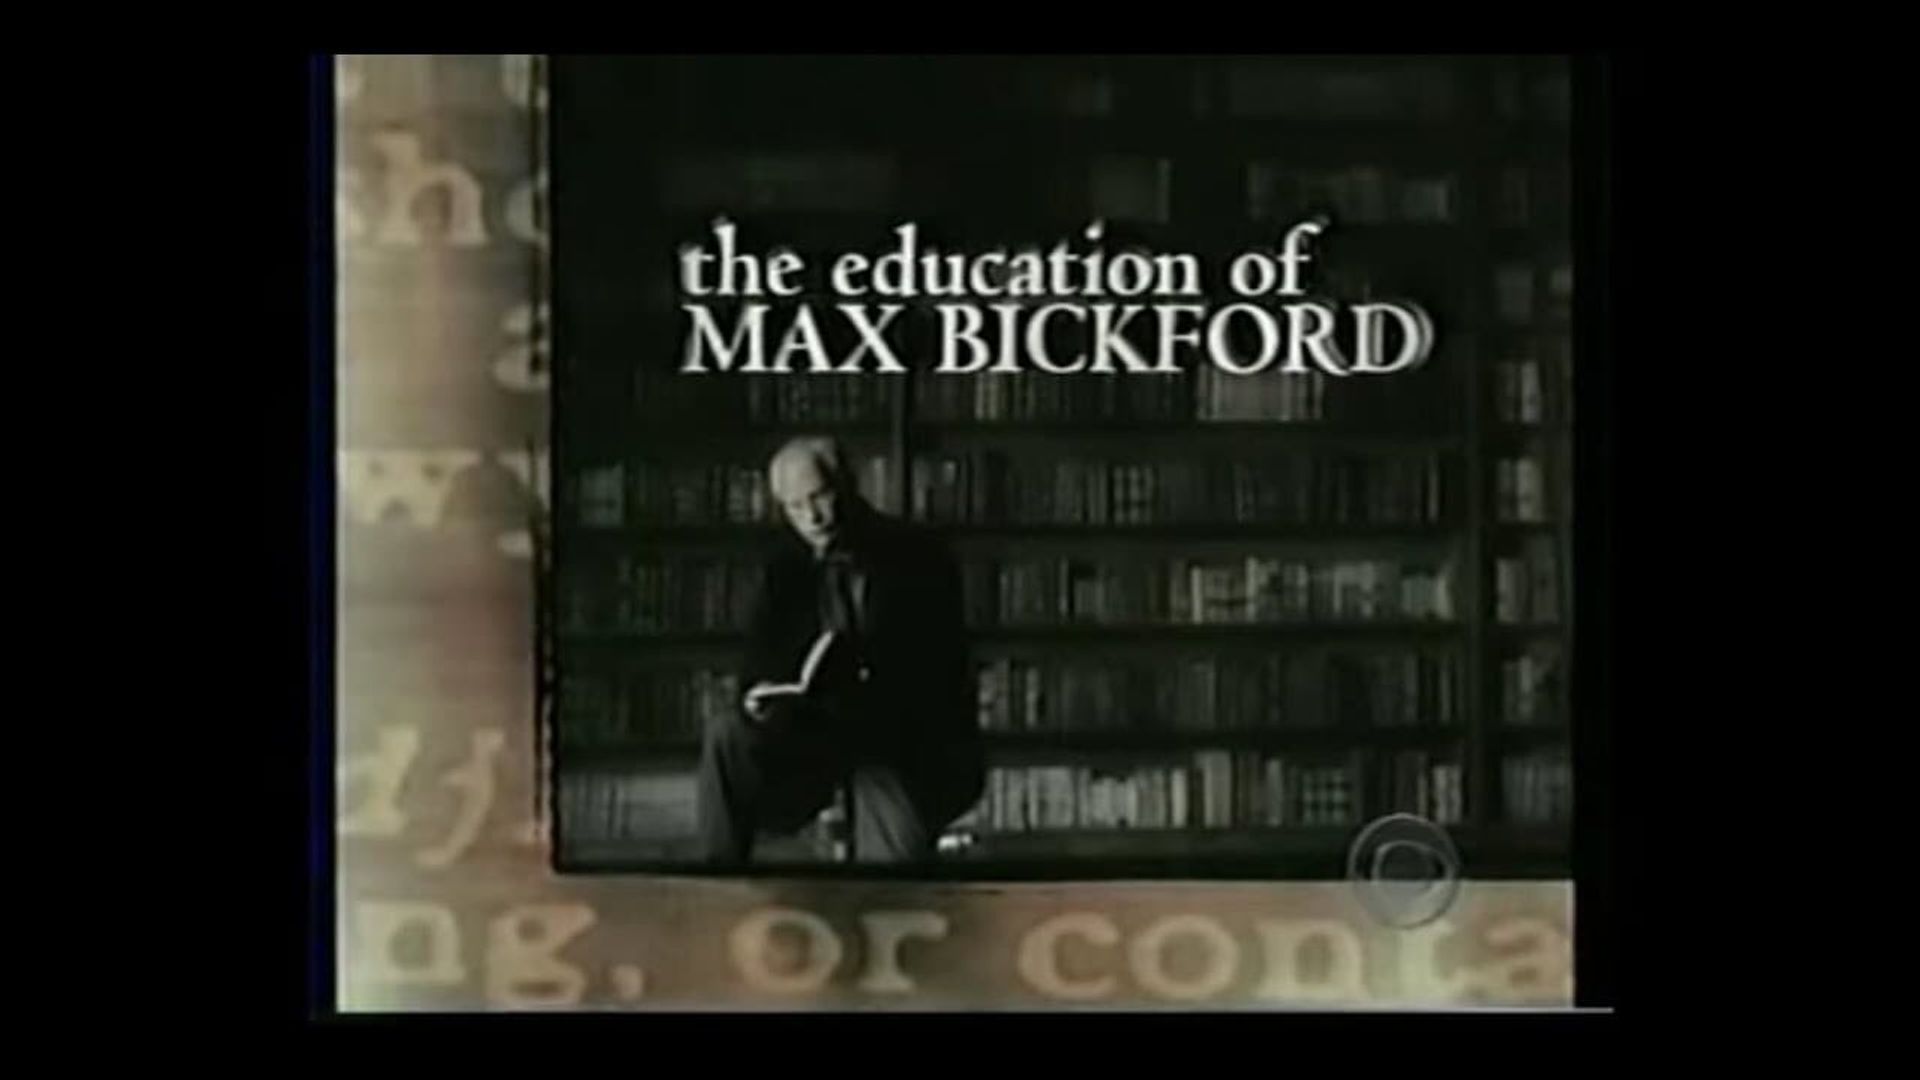 The Education of Max Bickford background